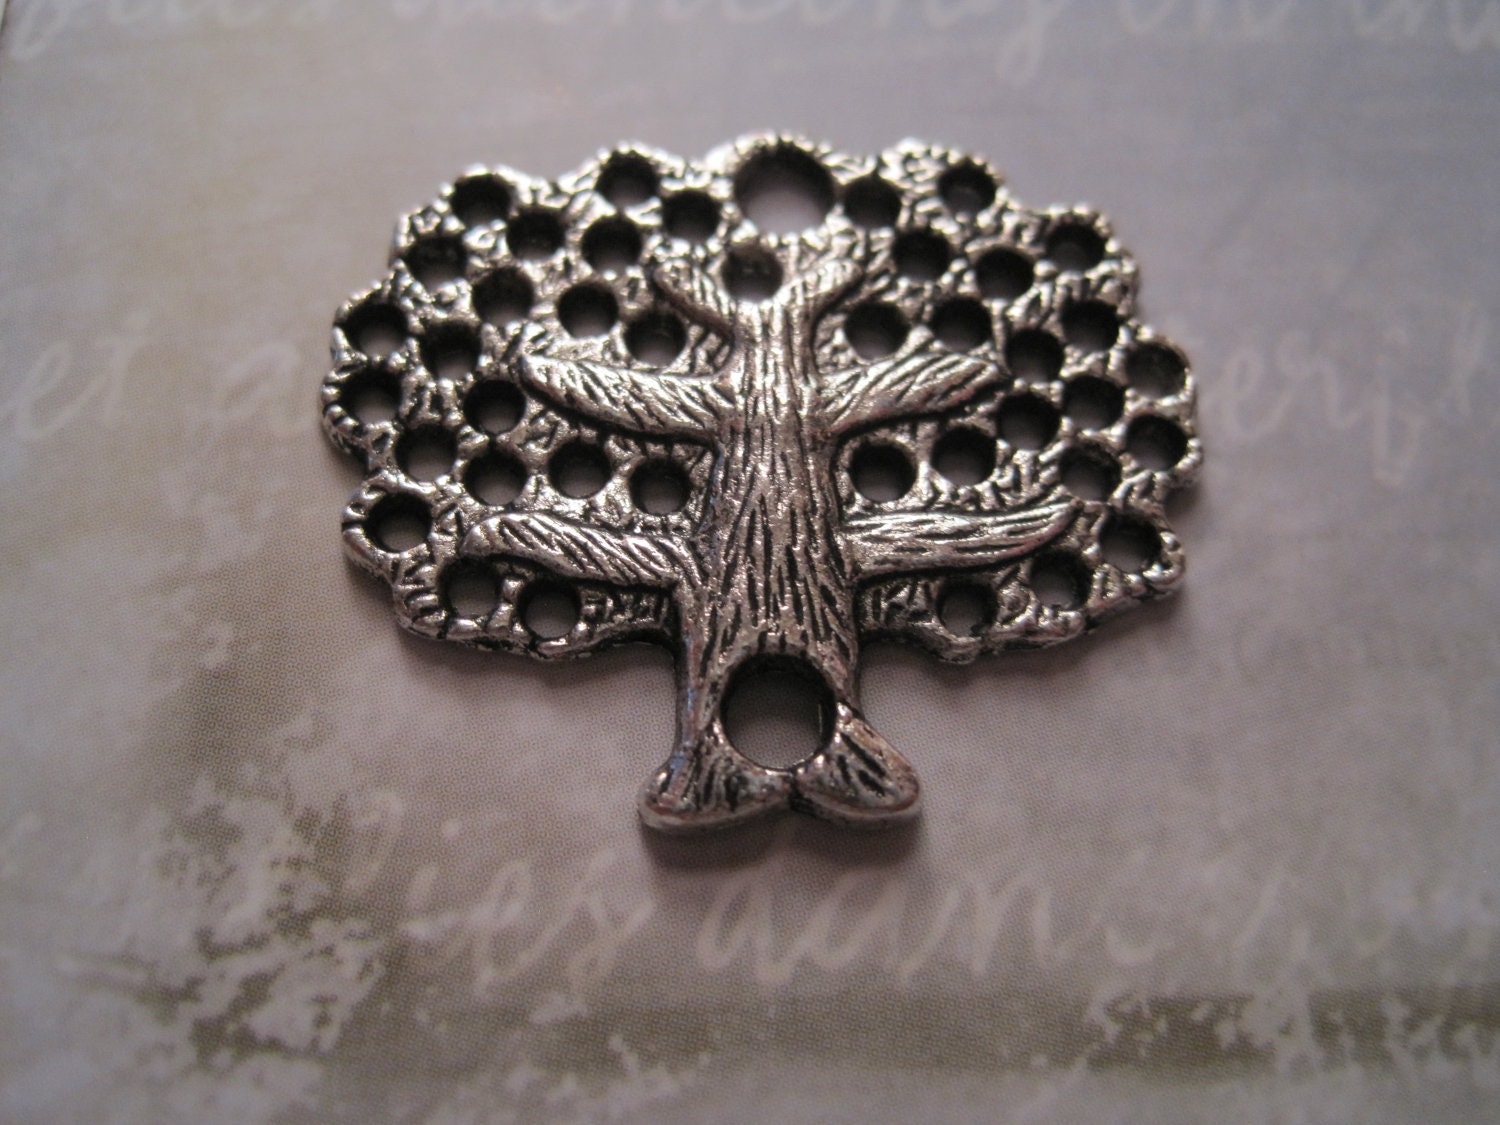 Beautiful pair of antique silver family tree pendant charms - gabyschiccreations